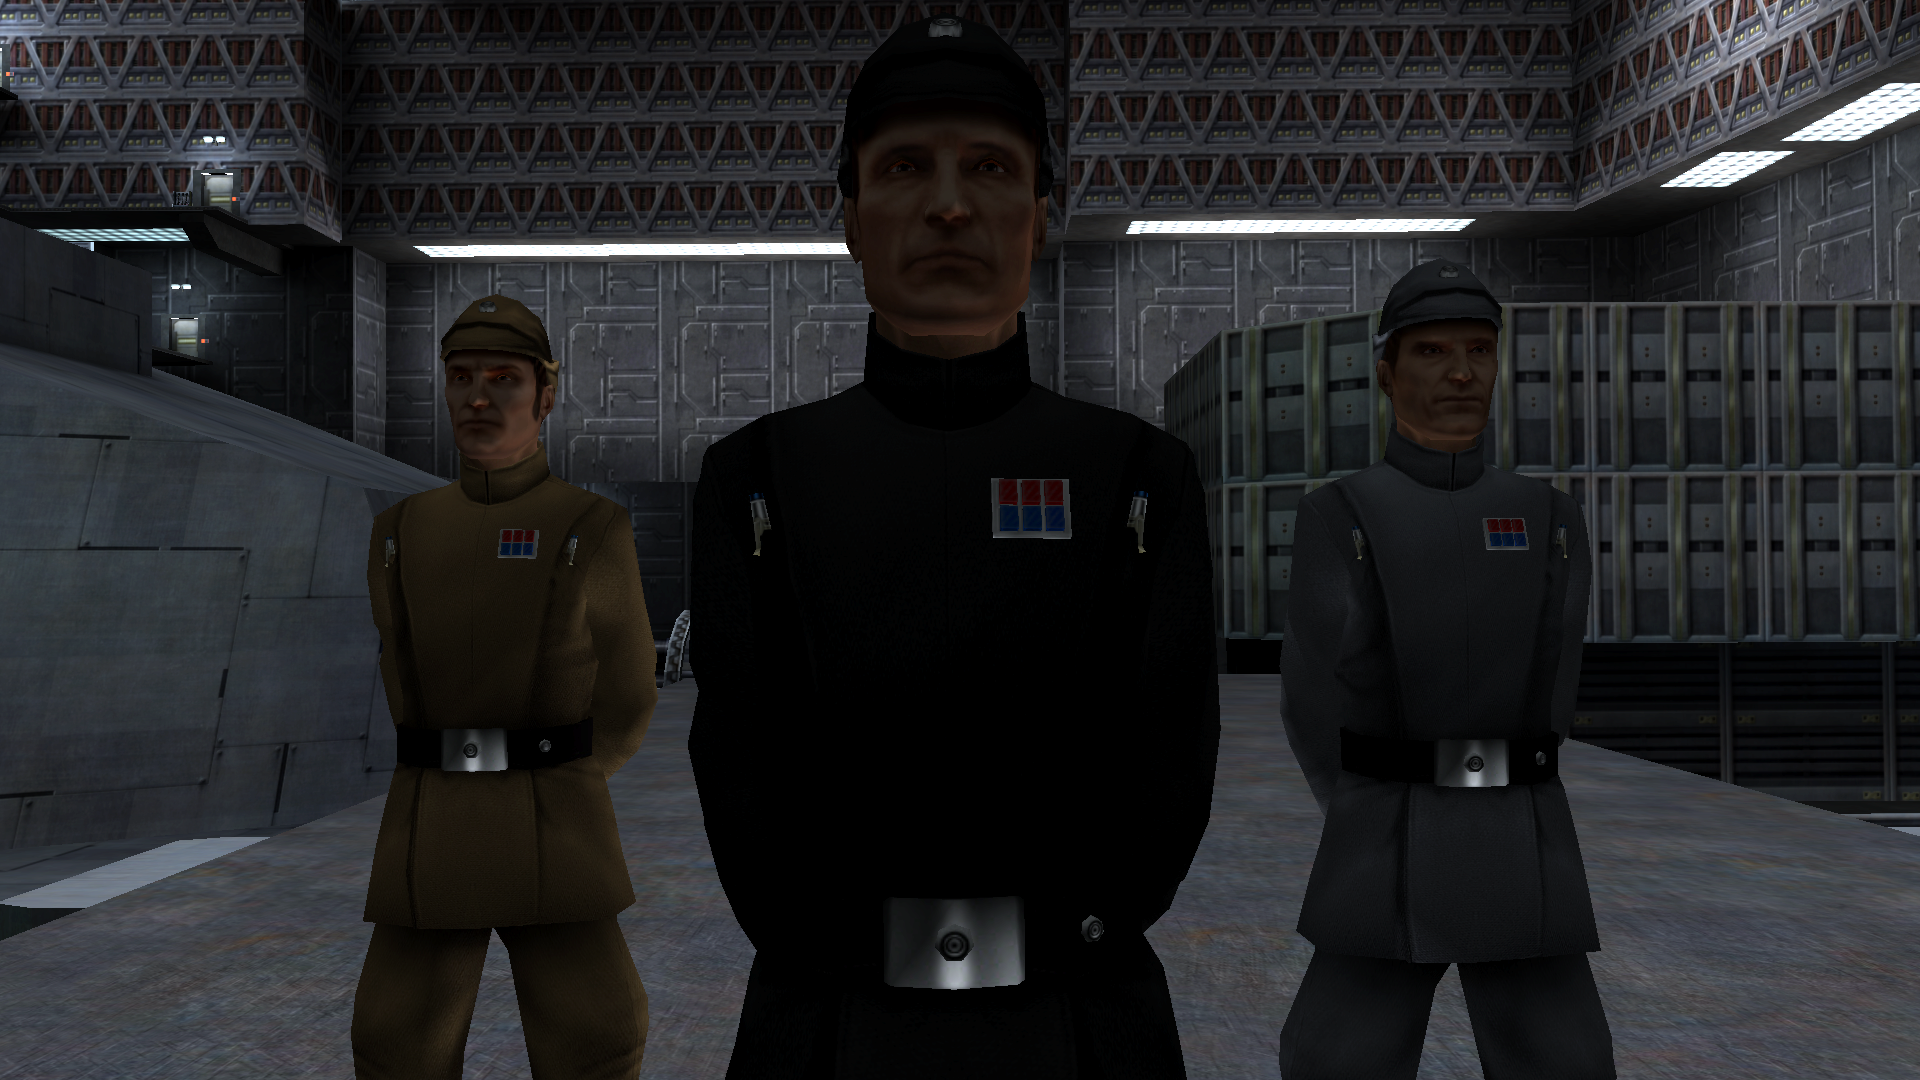 More information about "Imperial Base Officers"